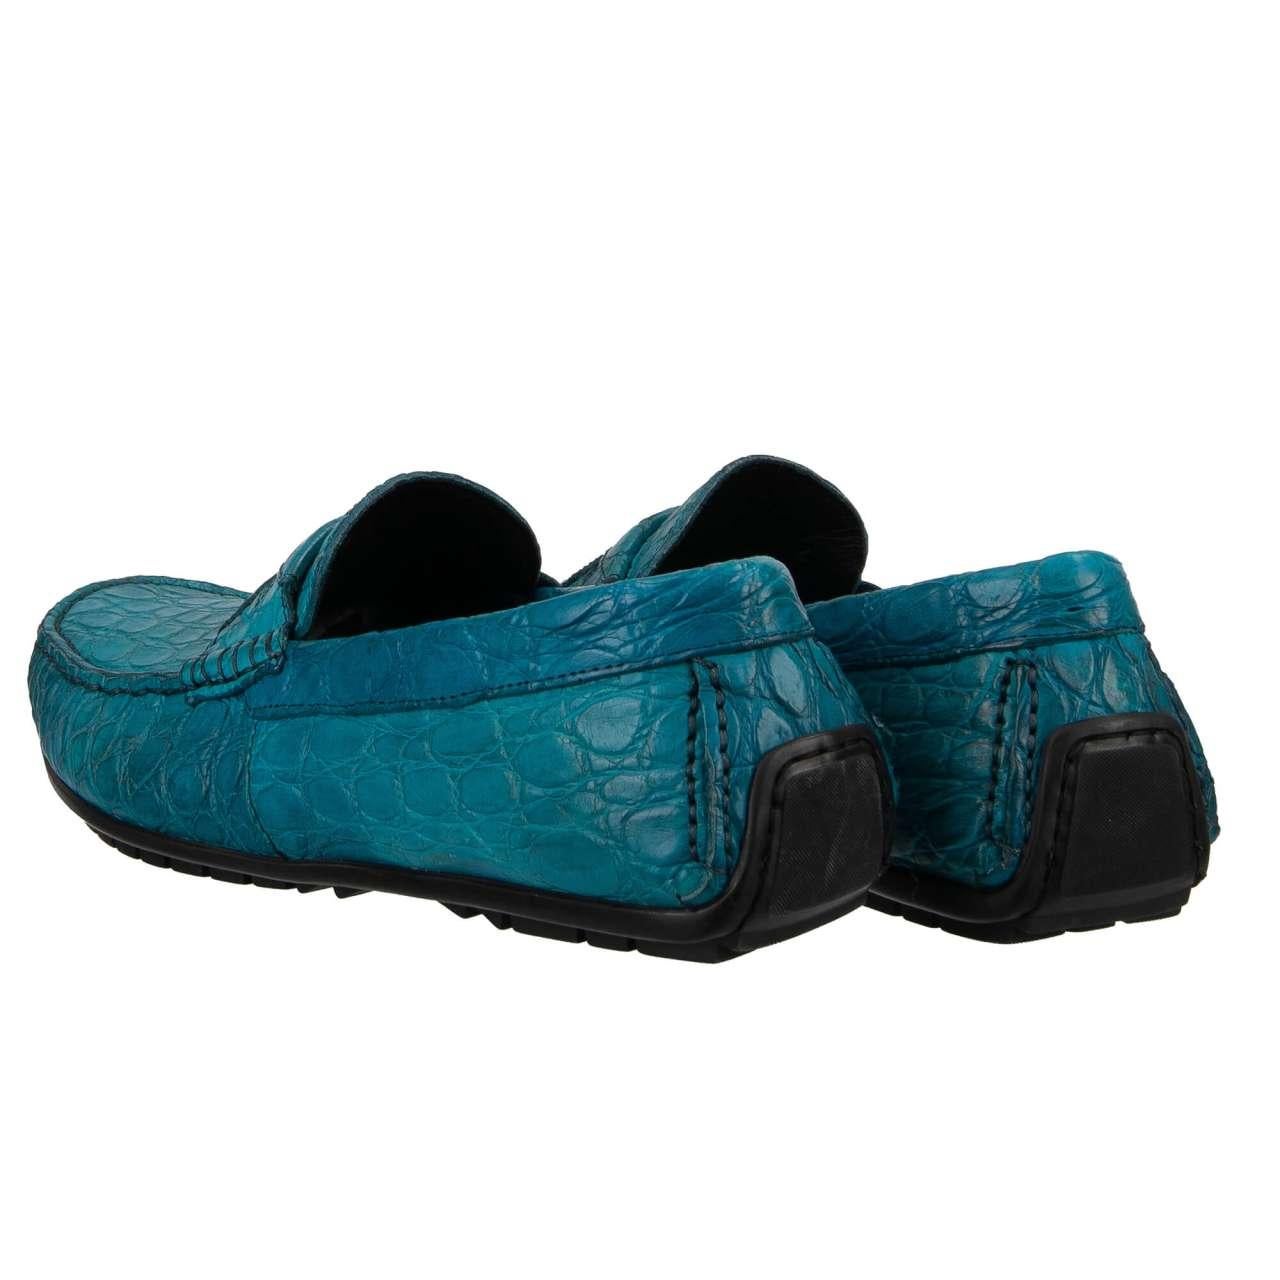 D&G - Caiman Leather Moccasins Loafer Shoes RAGUSA Turquoise Blue EUR 40 For Sale 1